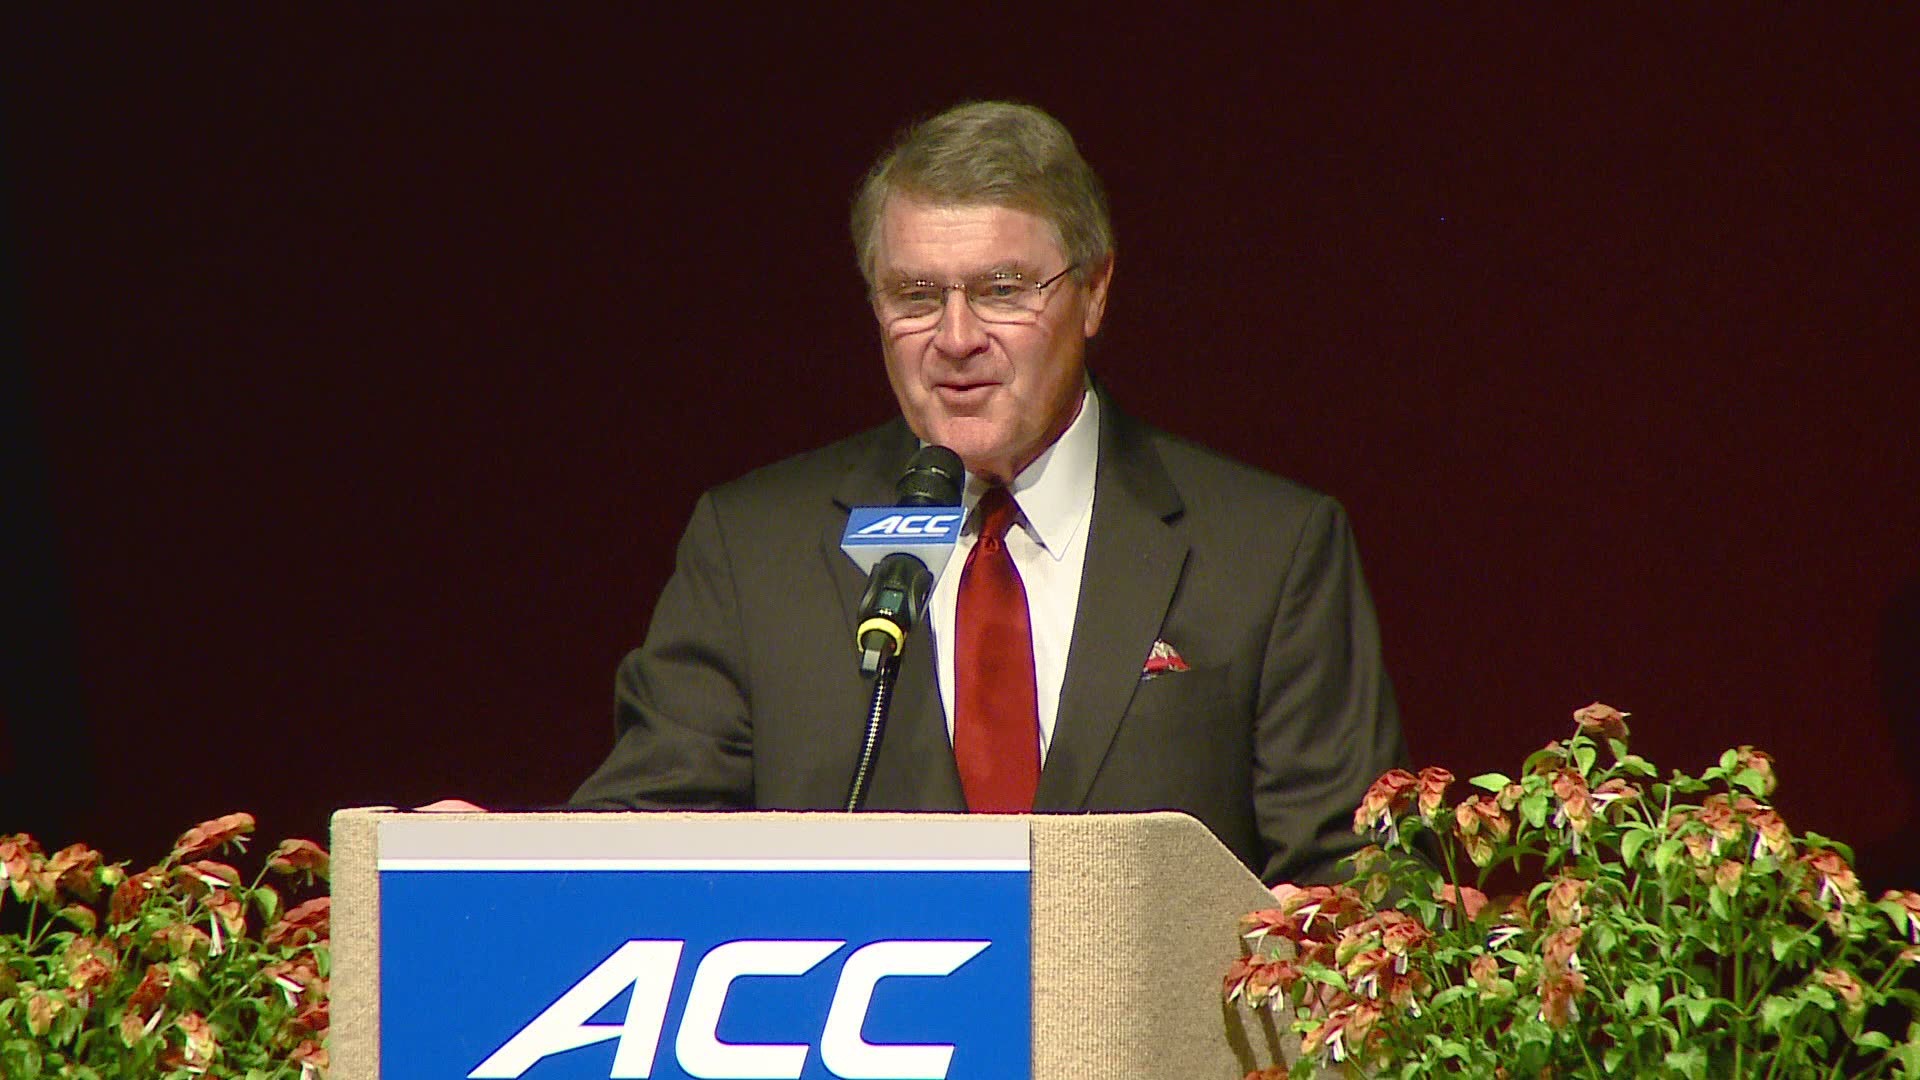 ACC Commissioner John Swofford has announced his plan to retire at the end of the 2020-21 athletic year. He is the conference's longest-tenured commissioner.